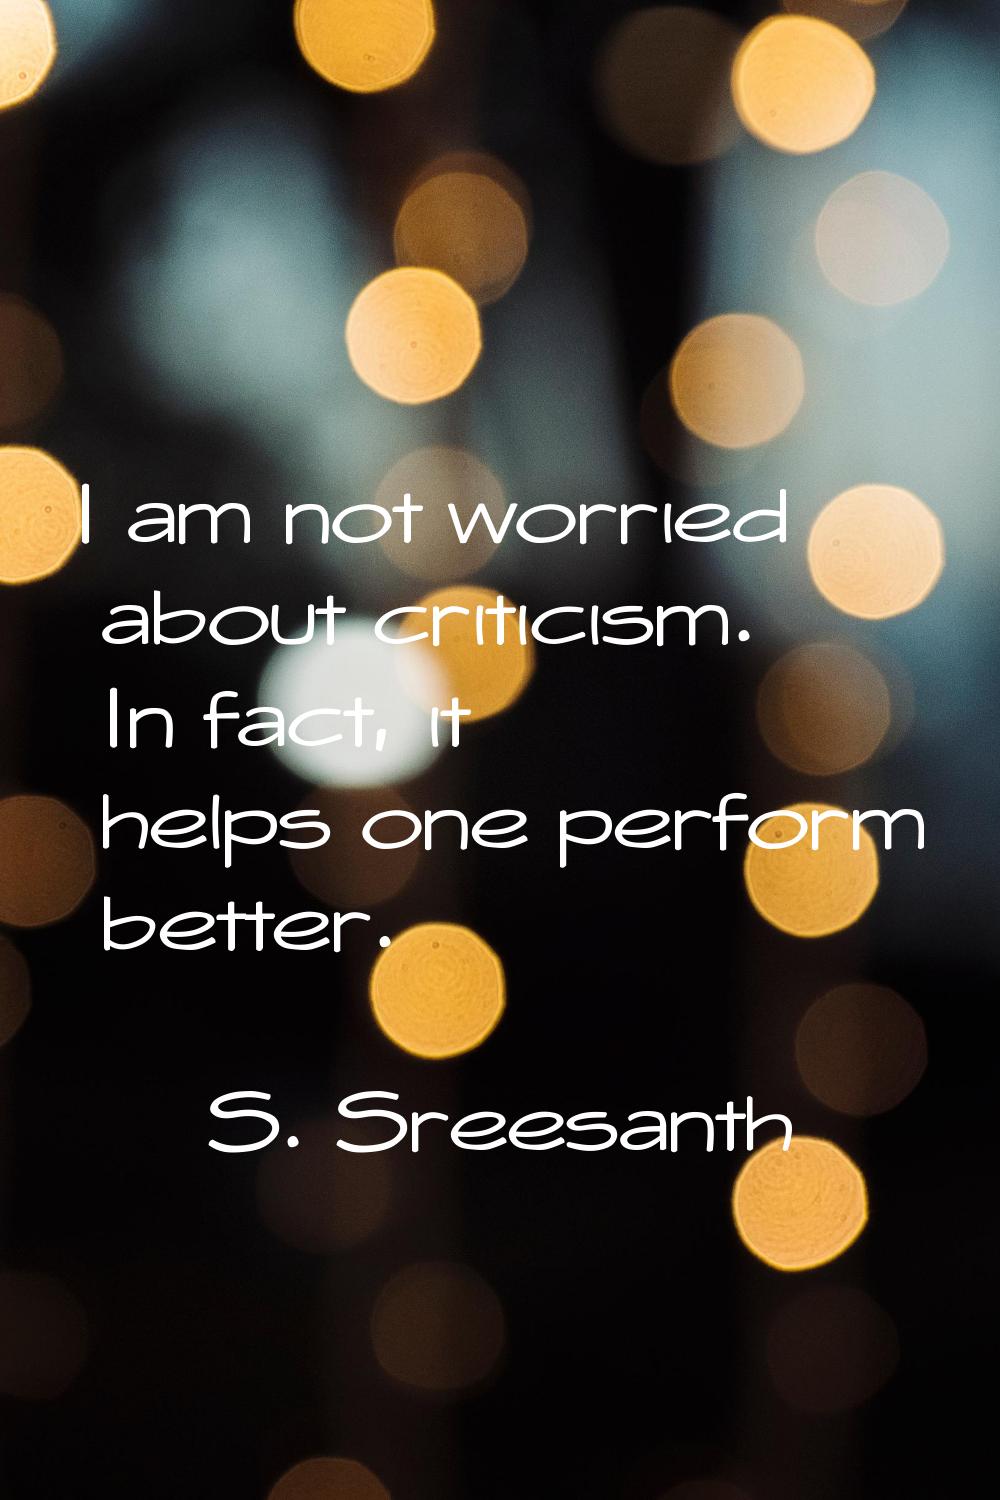 I am not worried about criticism. In fact, it helps one perform better.